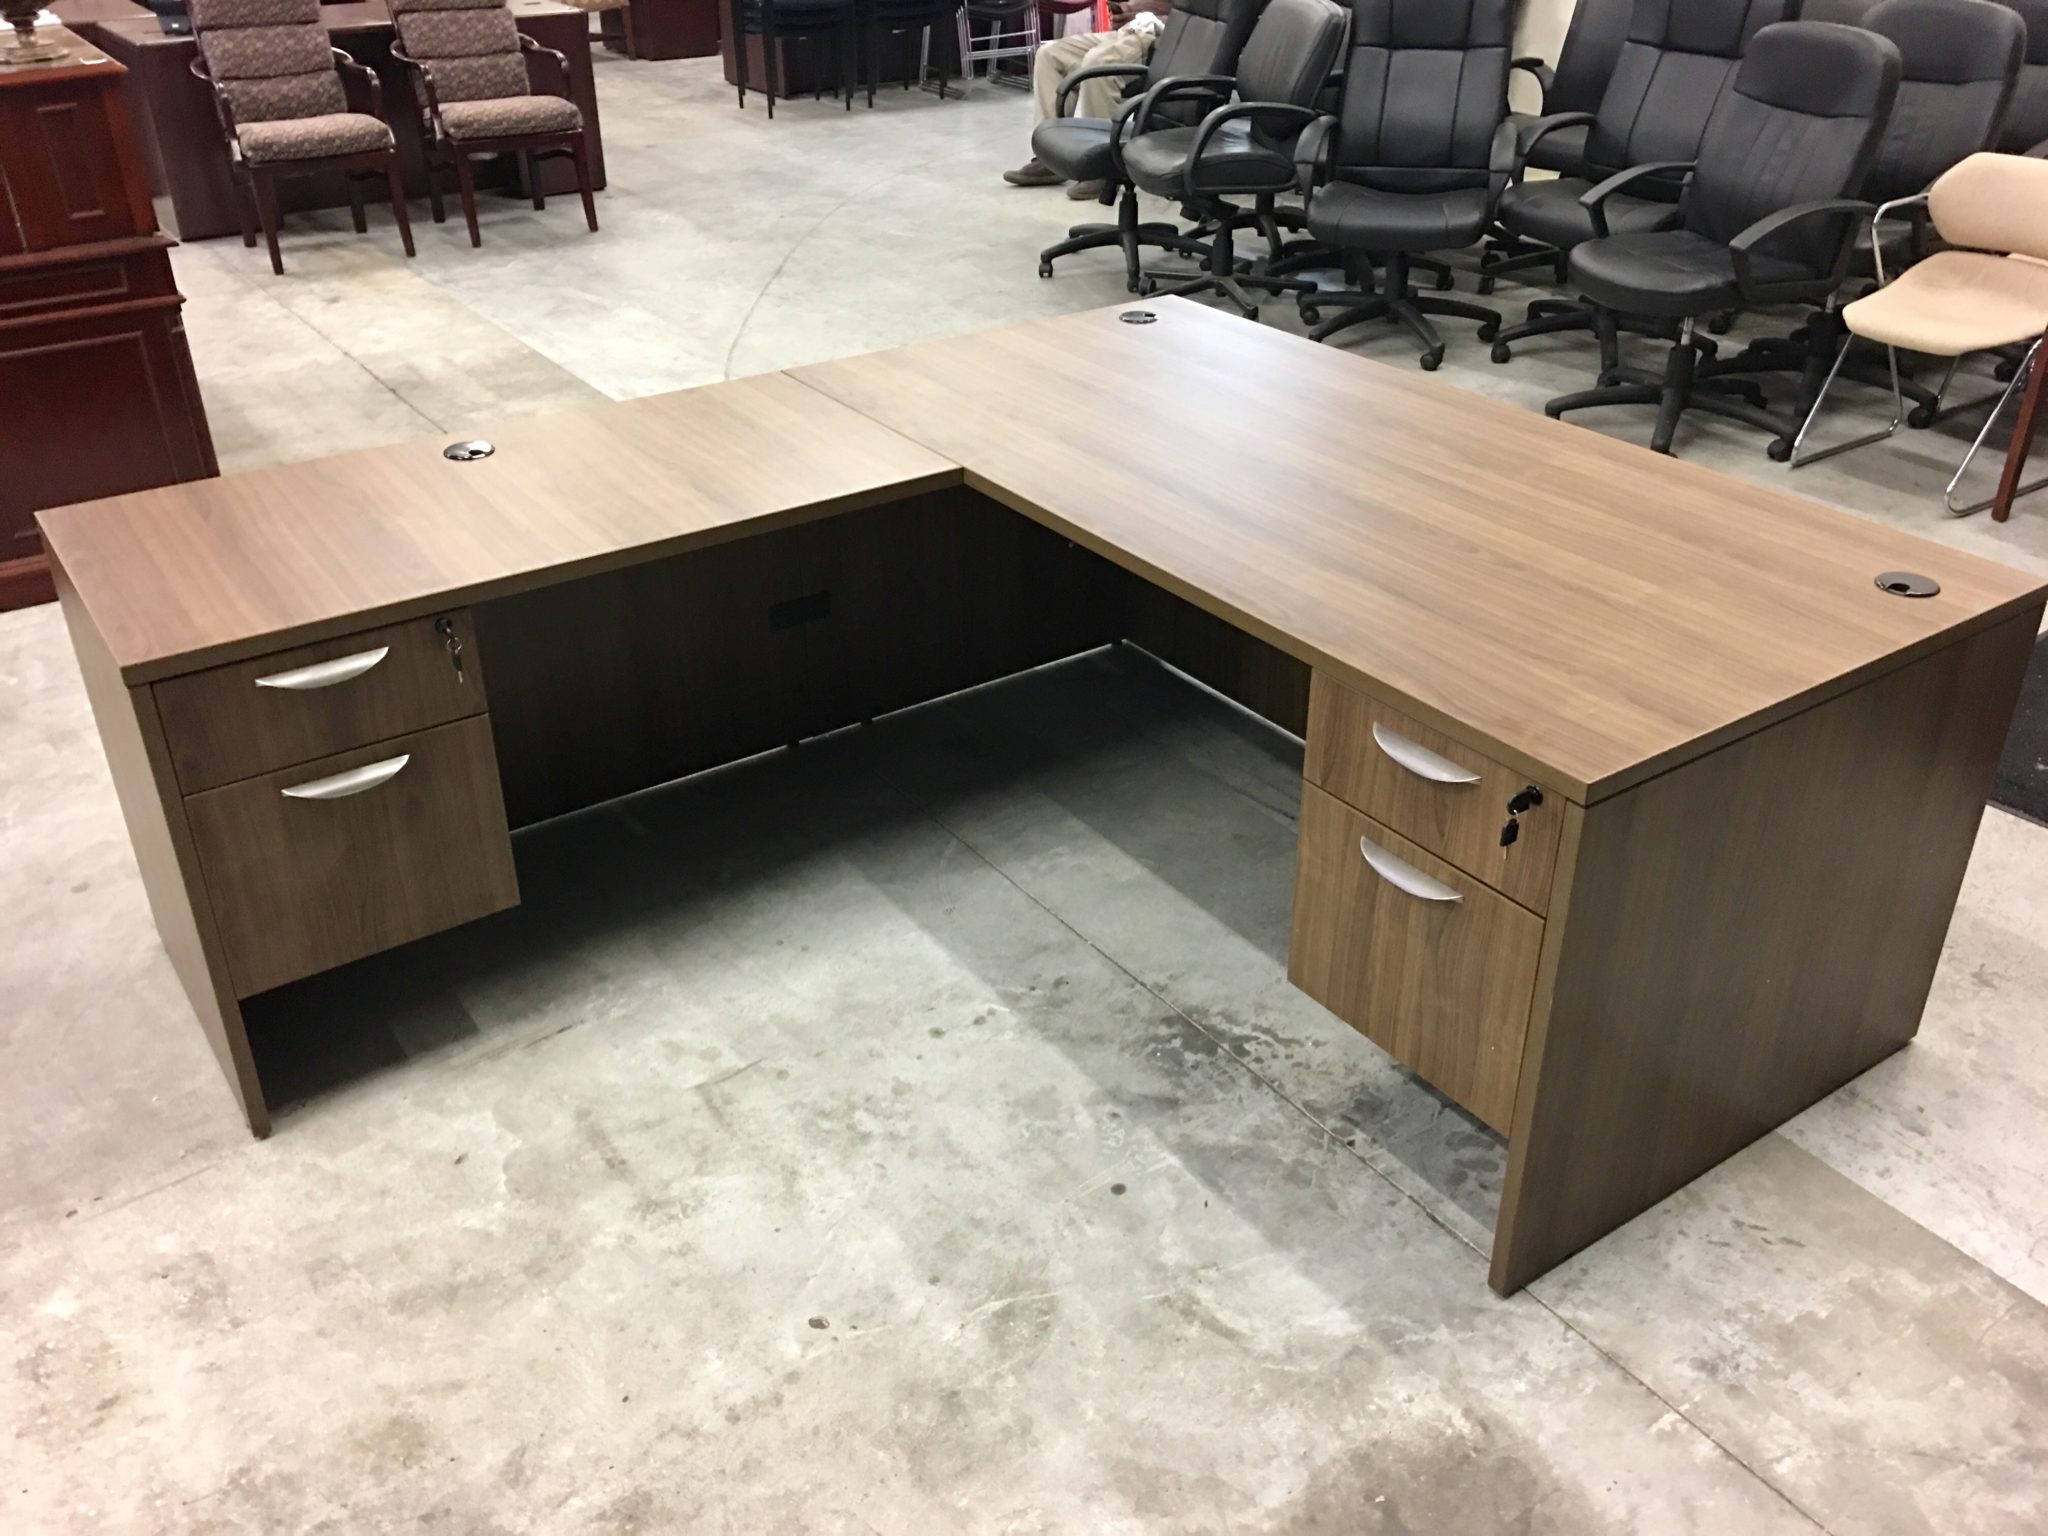 L-Shaped Desk with Two Pedestals